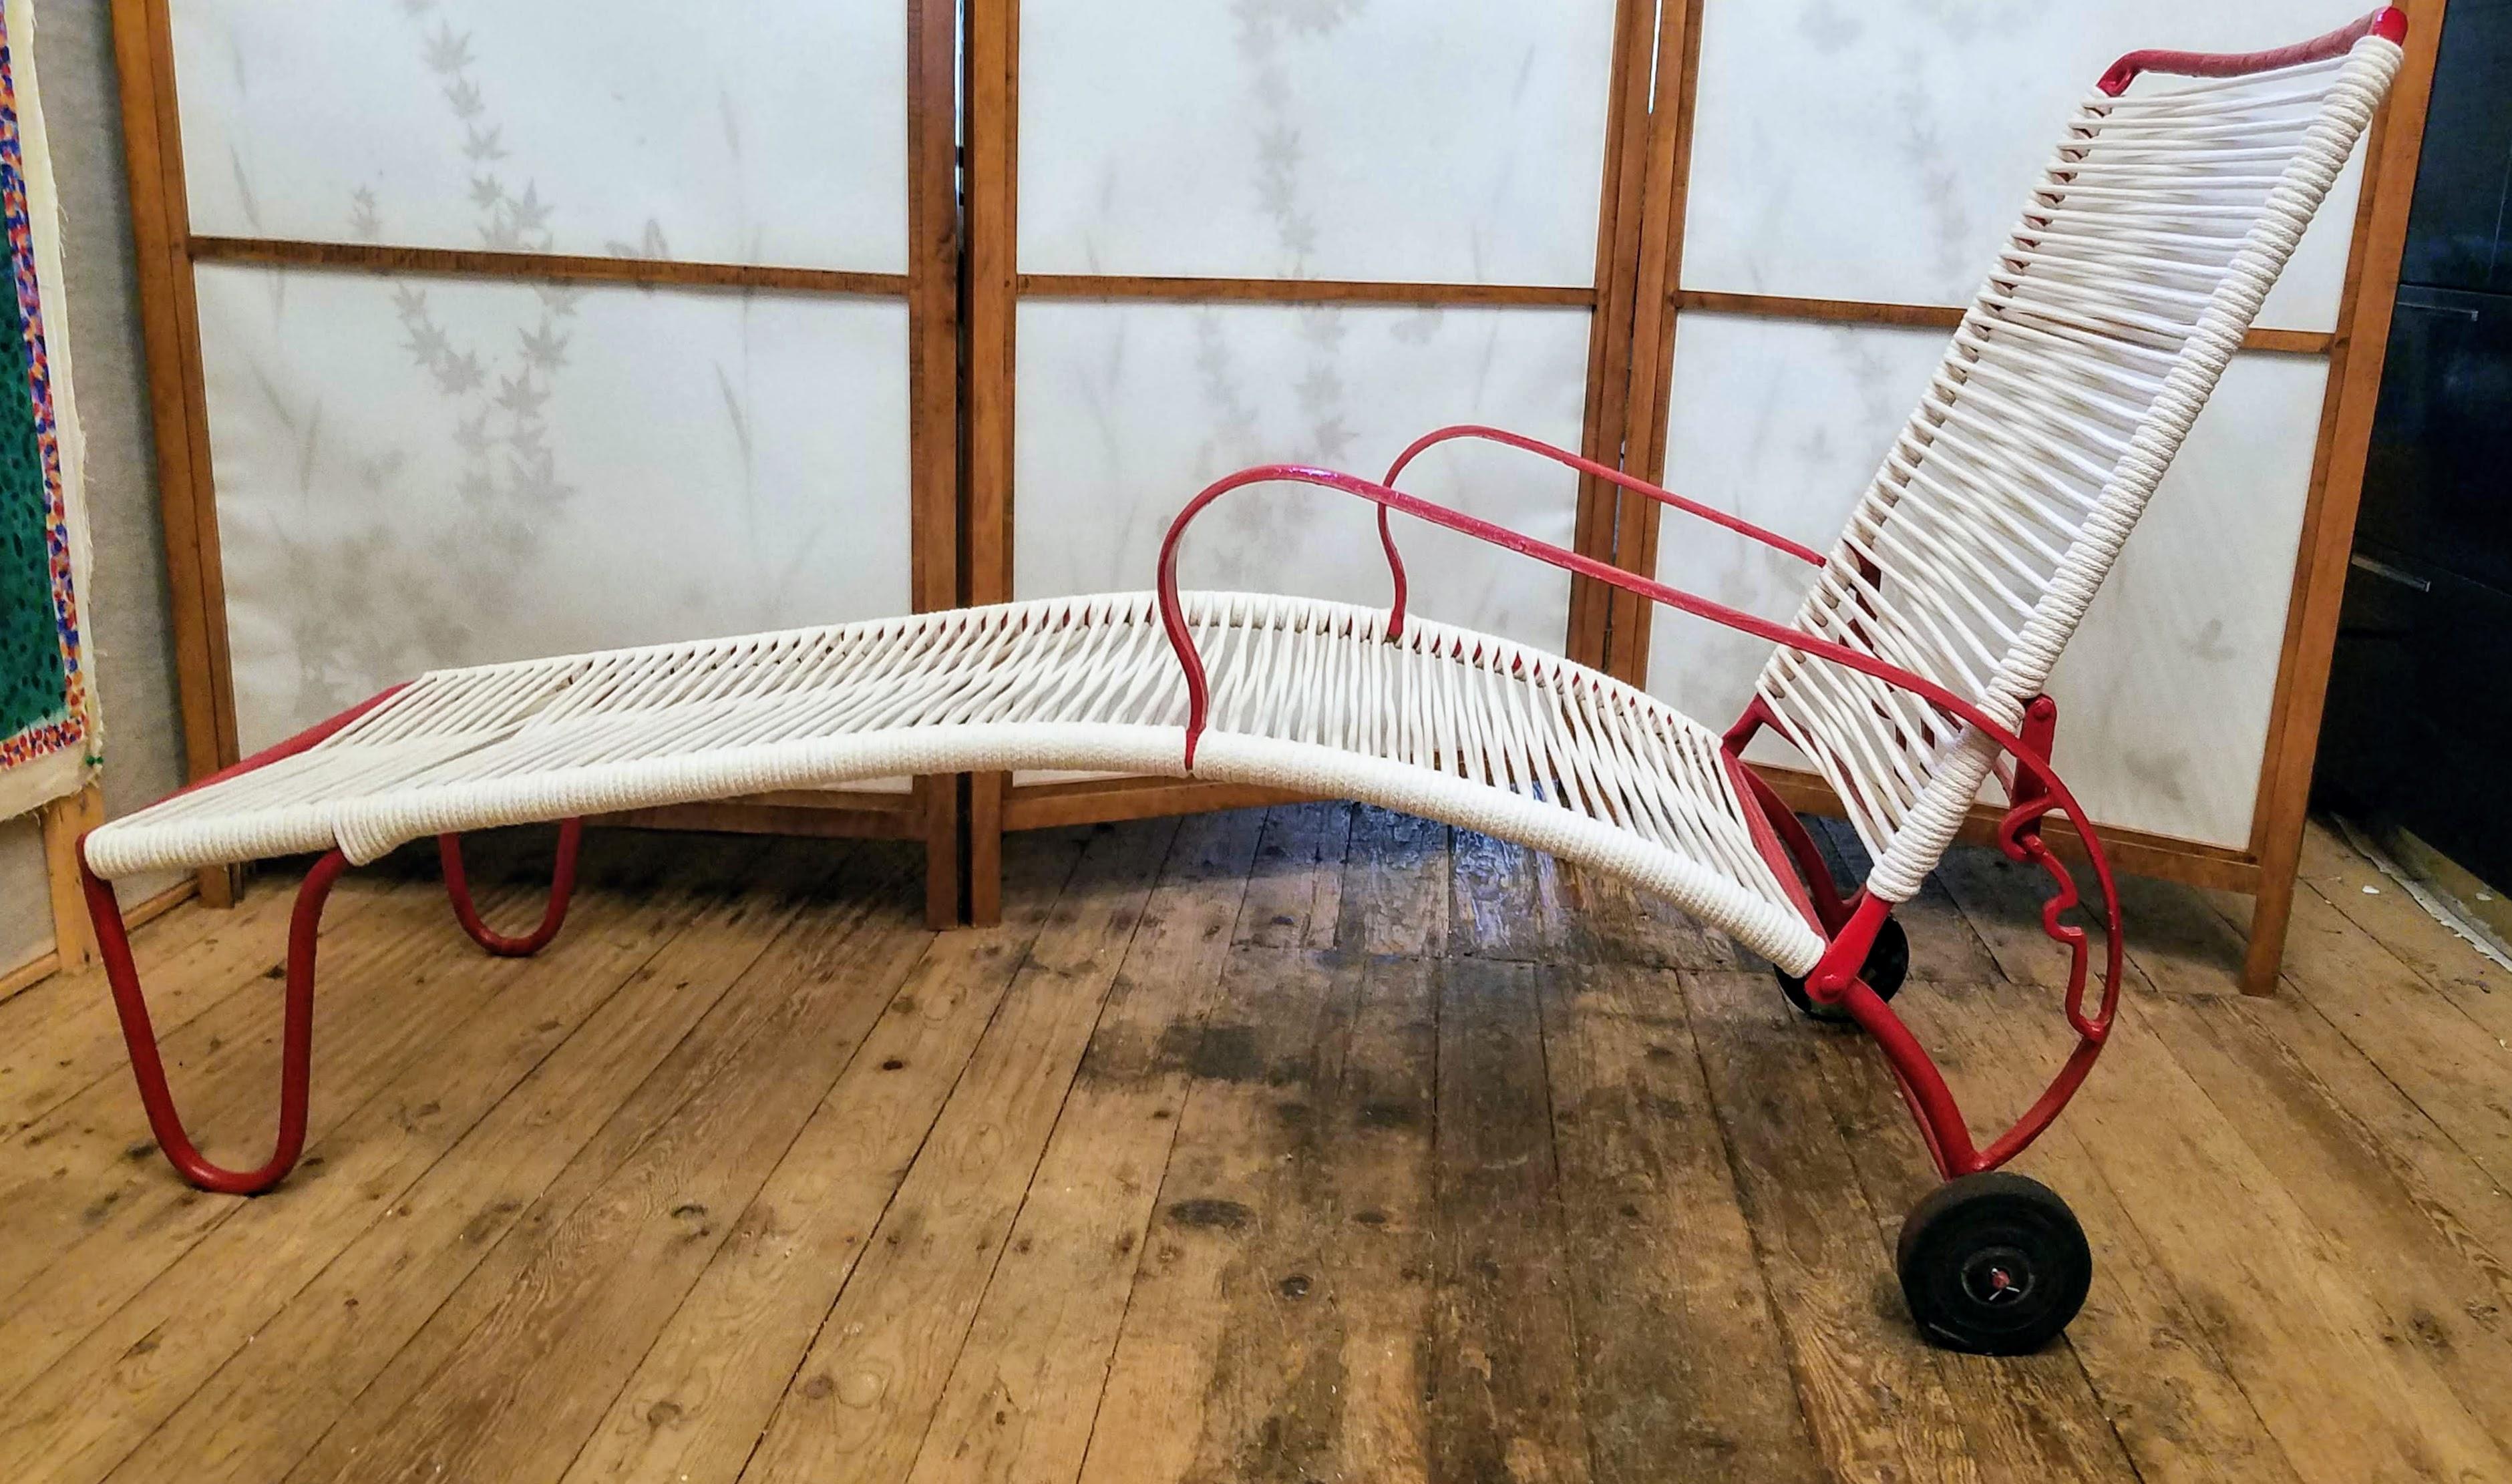 A Robert Lewis adjustable steel tube chaise lounge for outdoor and patio use hand crafted at his studio in Santa Barbara, CA. in the 1940s.
The asymmetric arms, the four inch diameter rubber wheels, the three position adjustable back and the built